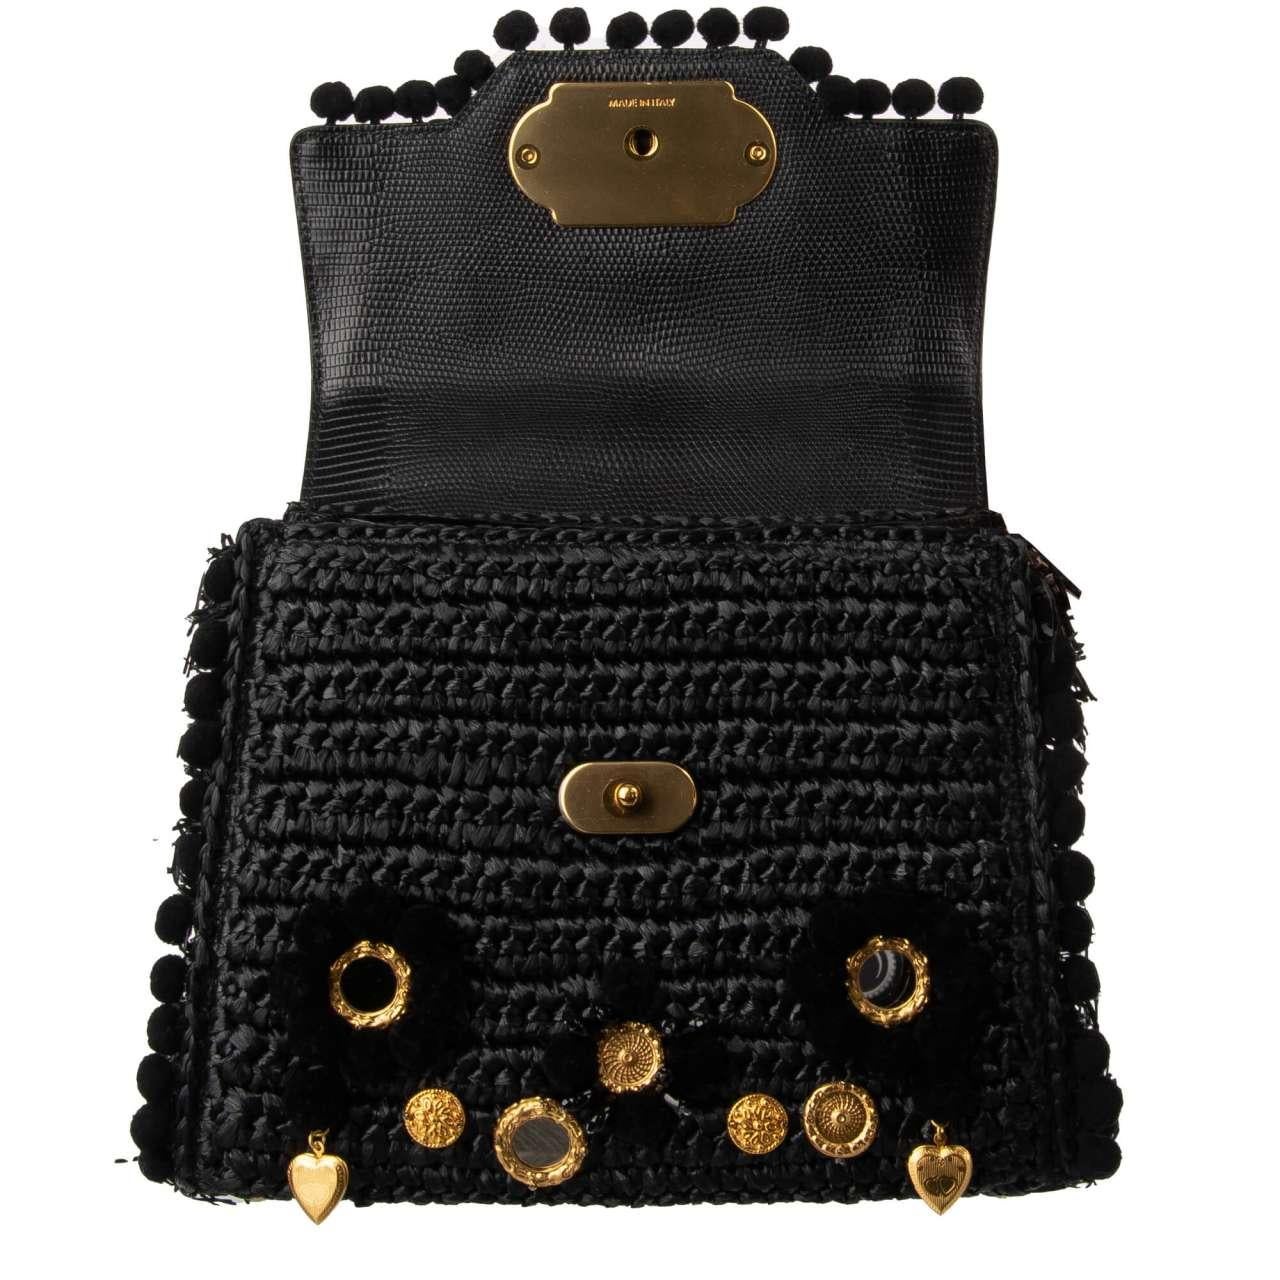 D&G - Raffia and Leather Tote Bag WELCOME with Charms and Pompoms Black For Sale 3